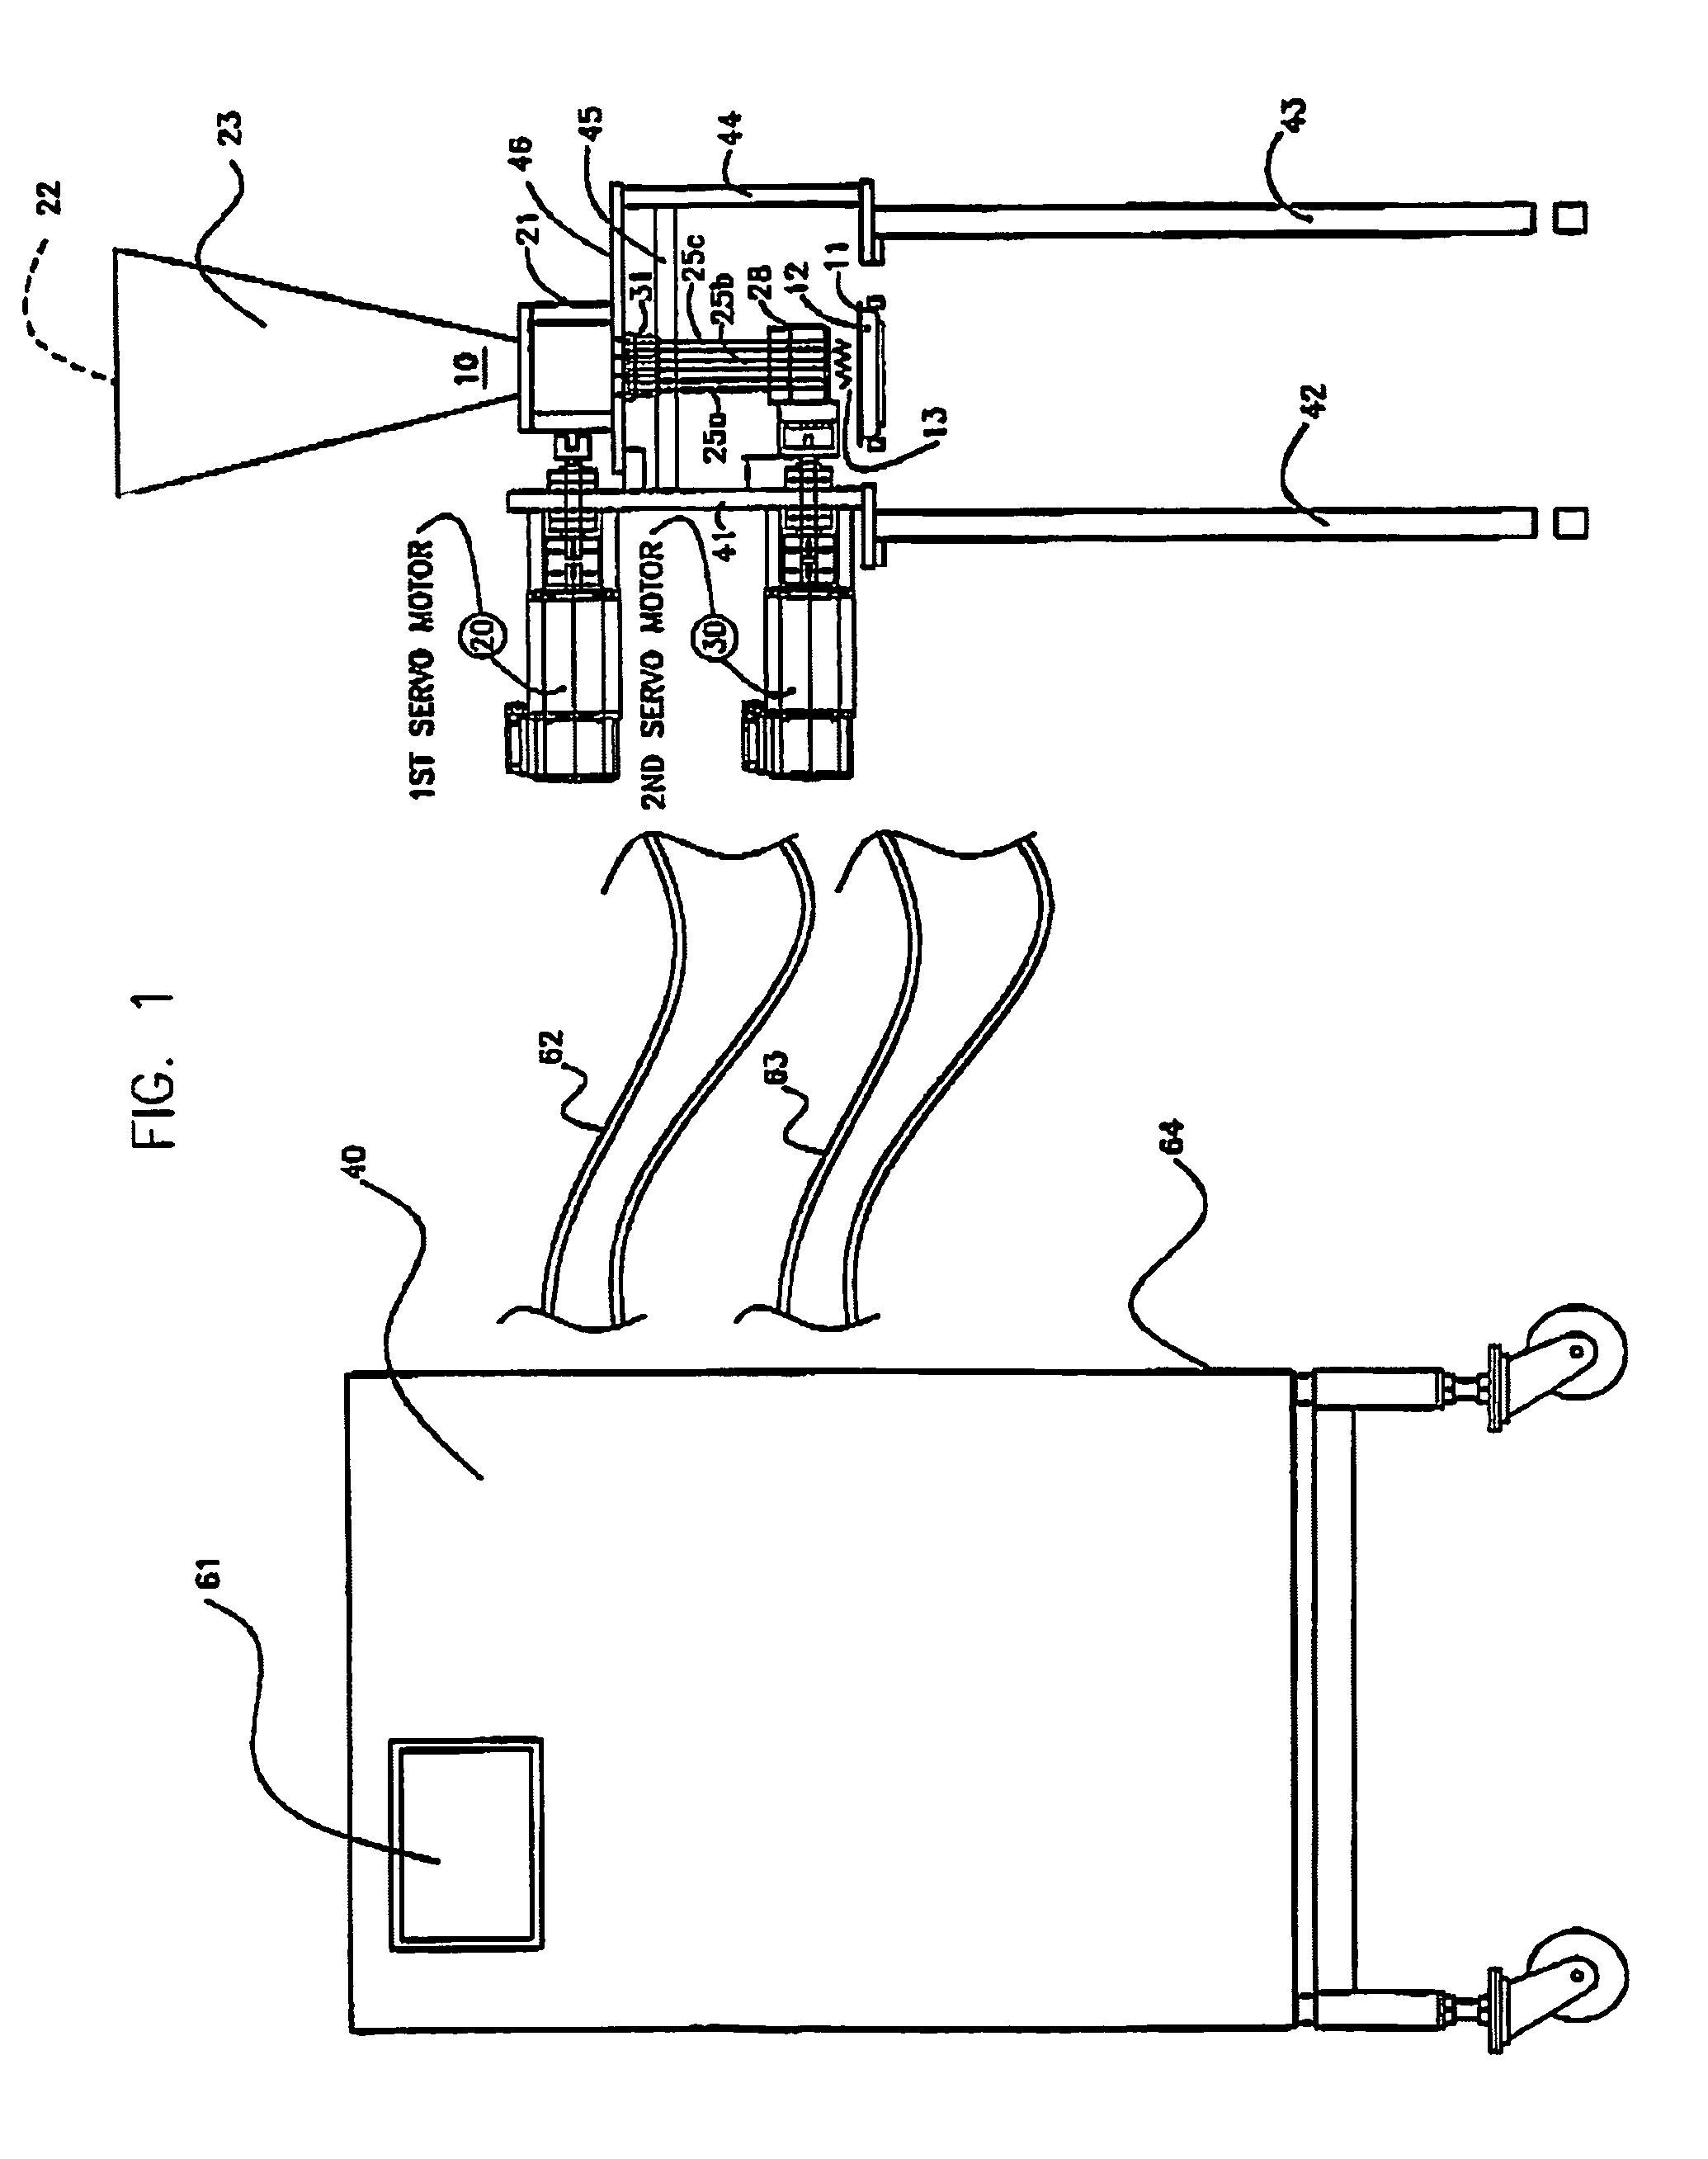 Apparatus for filling food trays at high speeds